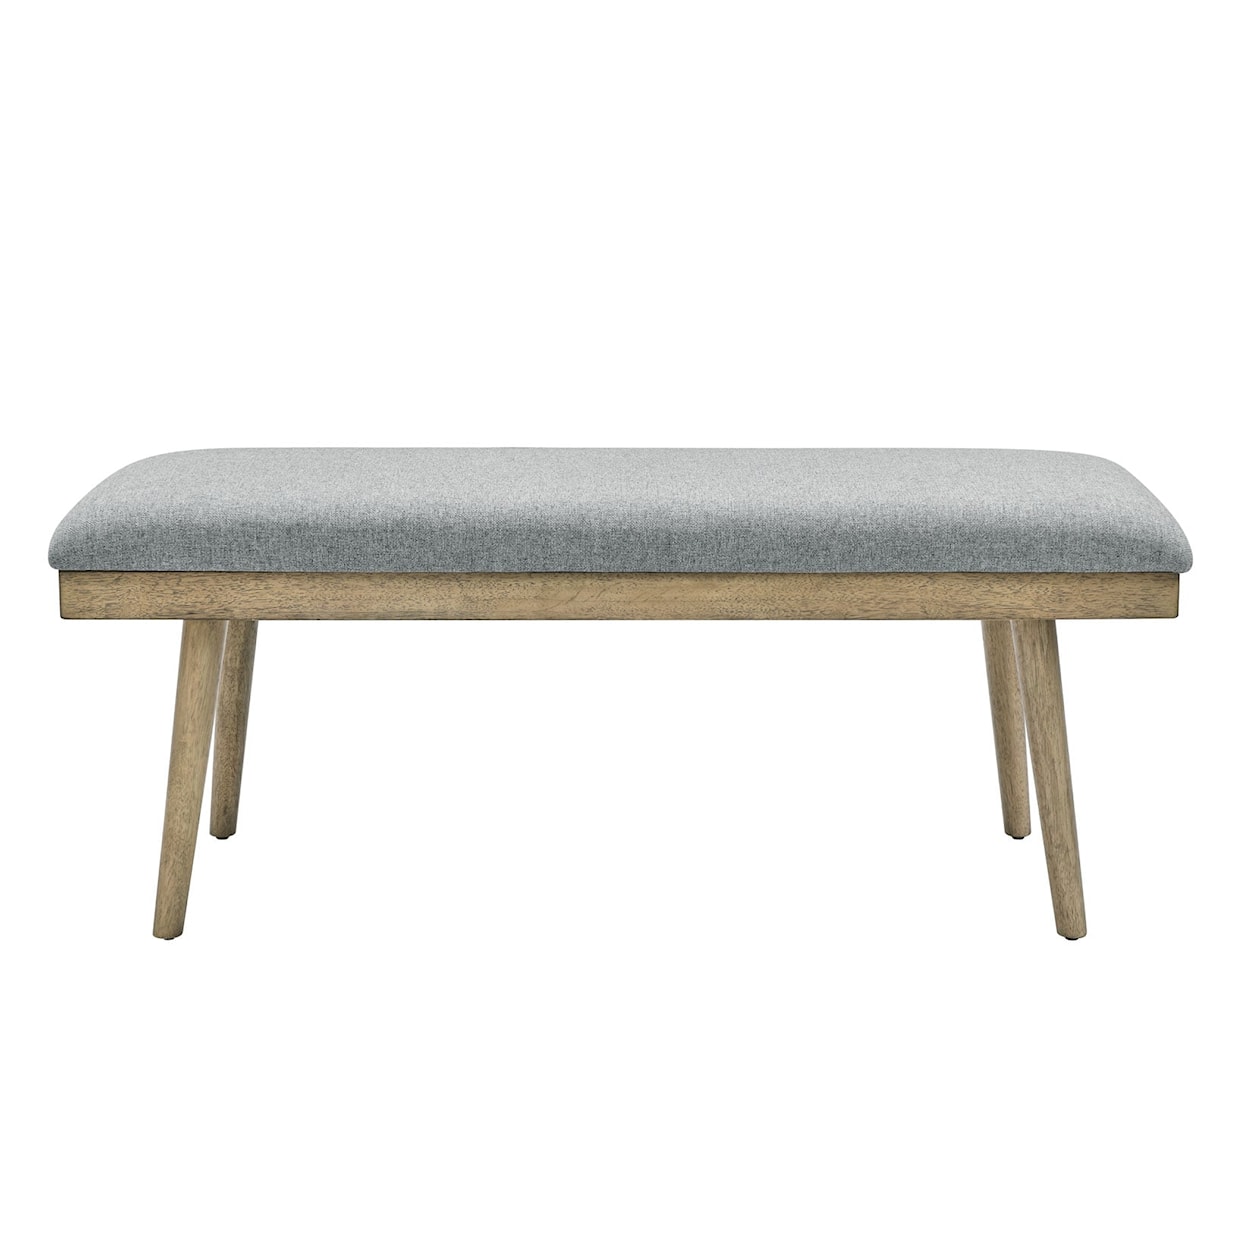 Belfort Essentials Norwood Gray Polyester Dining Bench